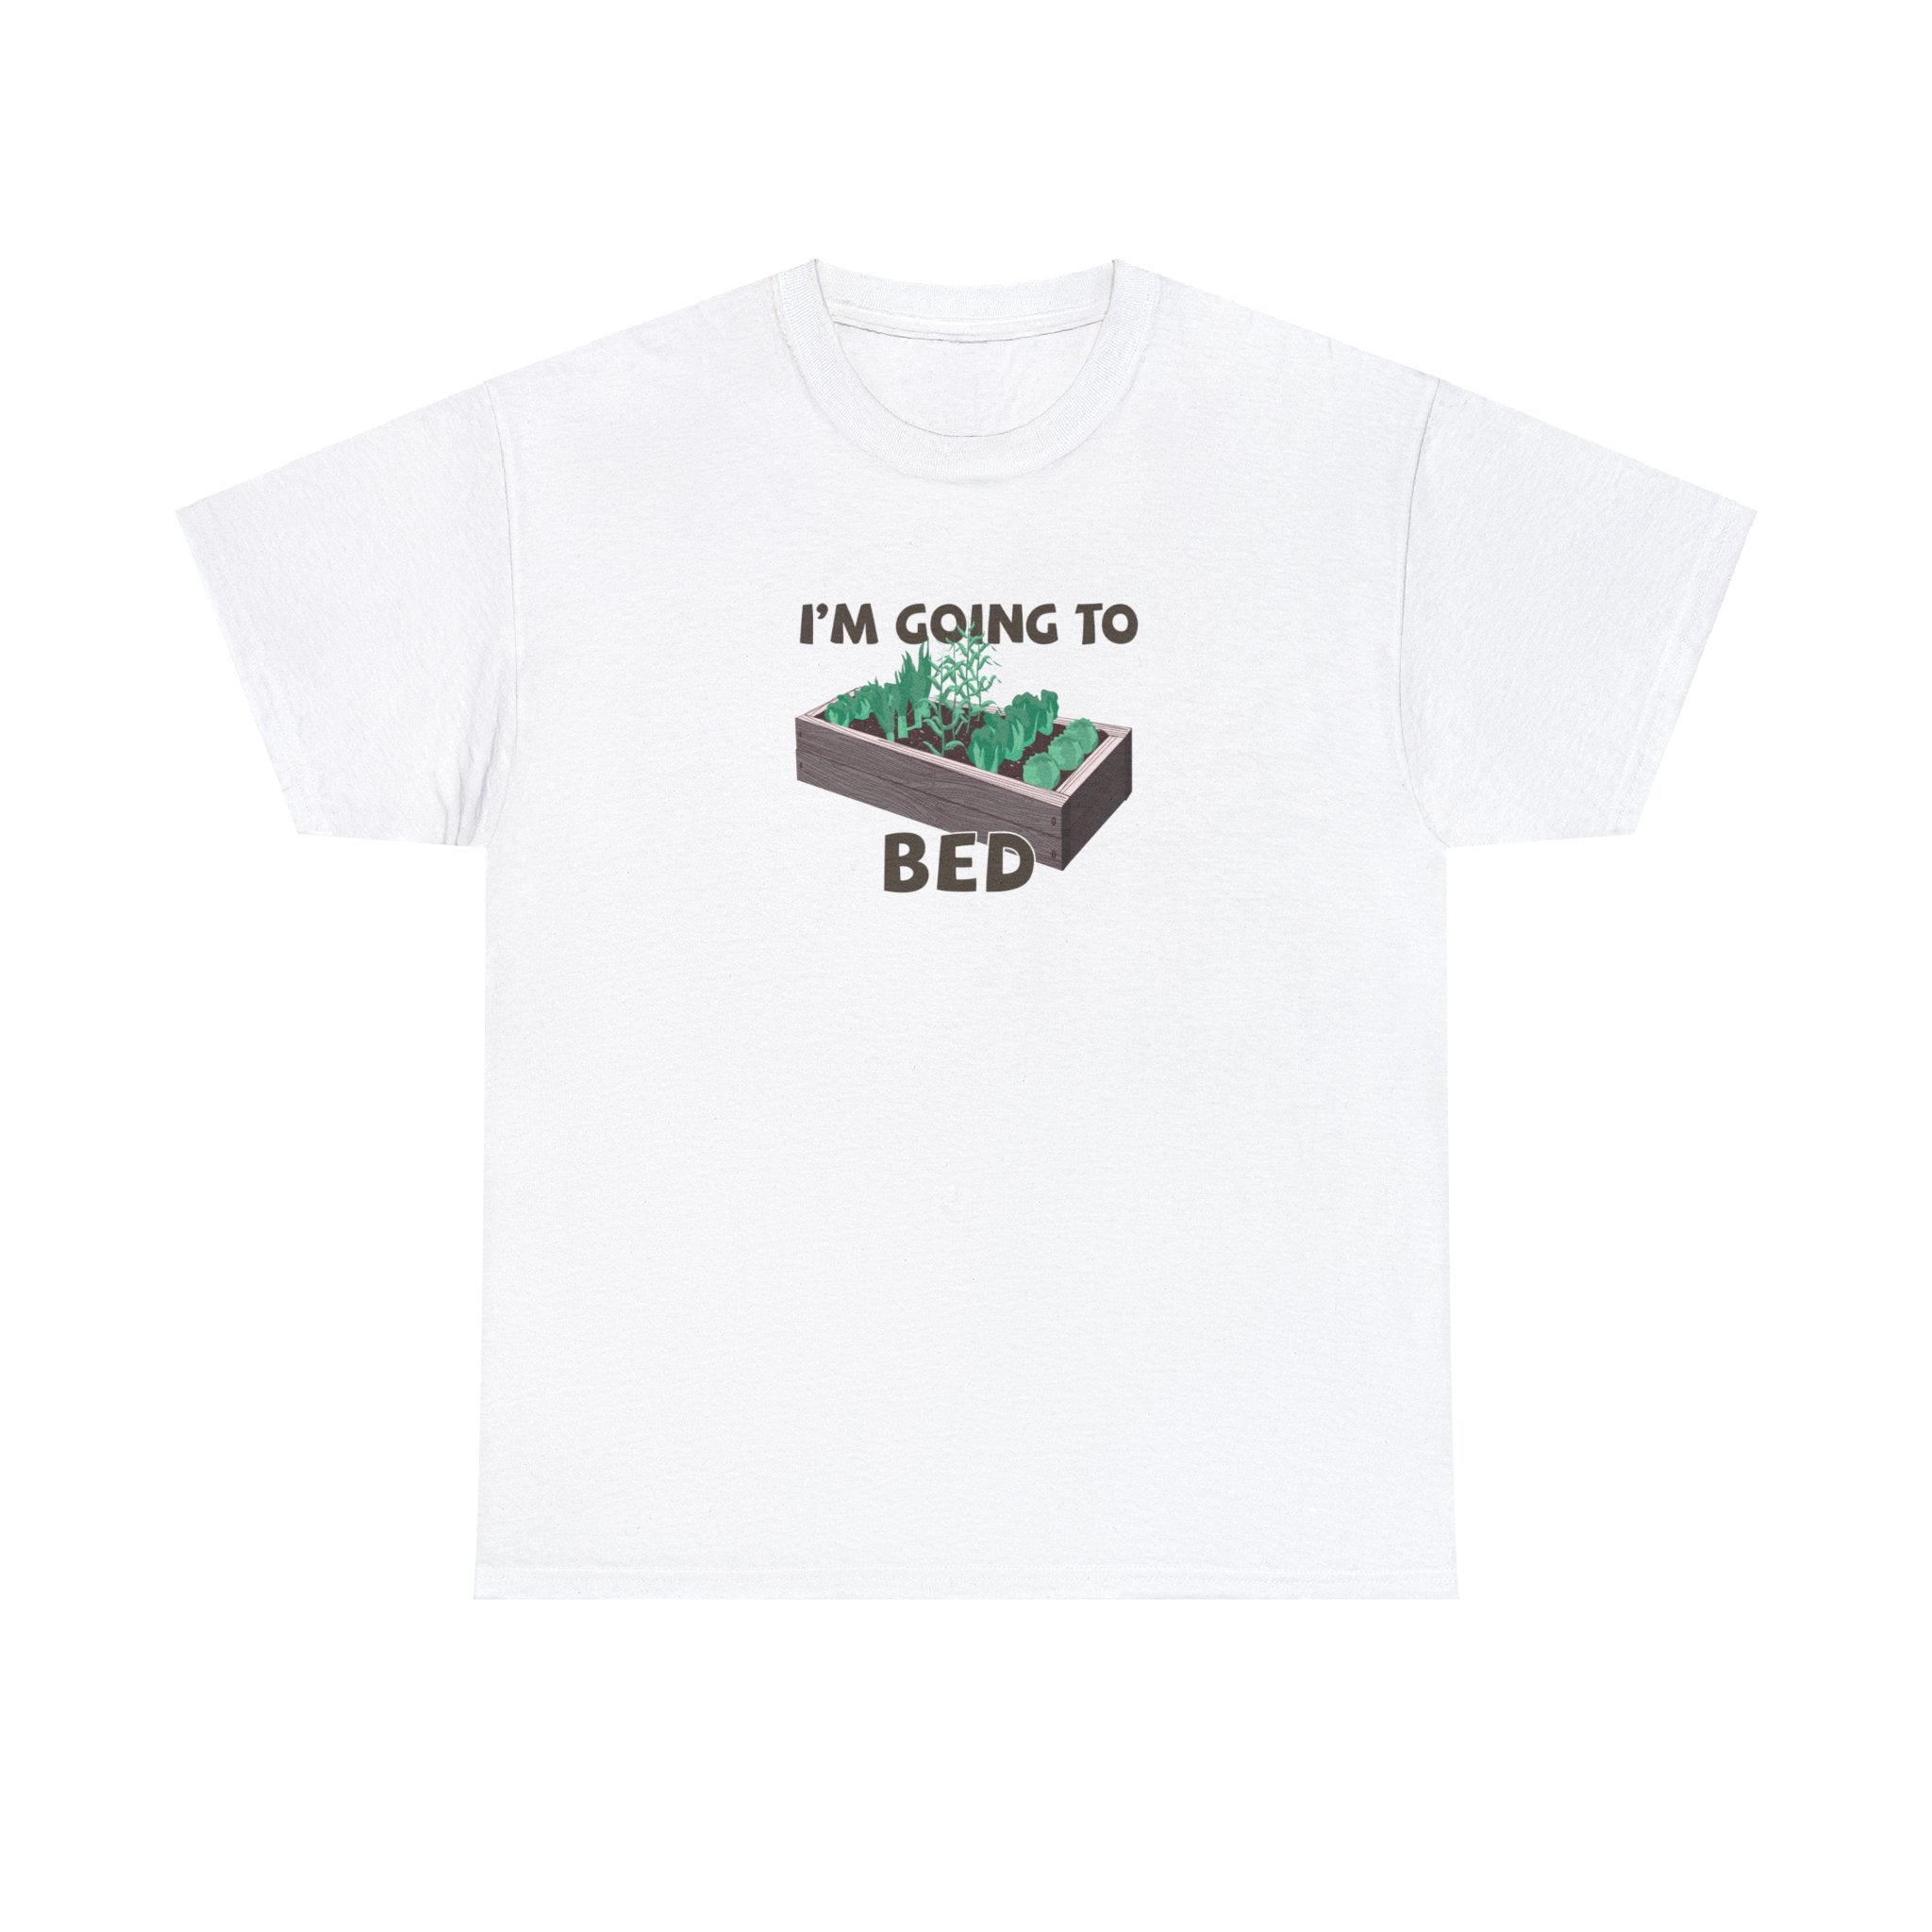 I'm going to bed (wood) T-shirt